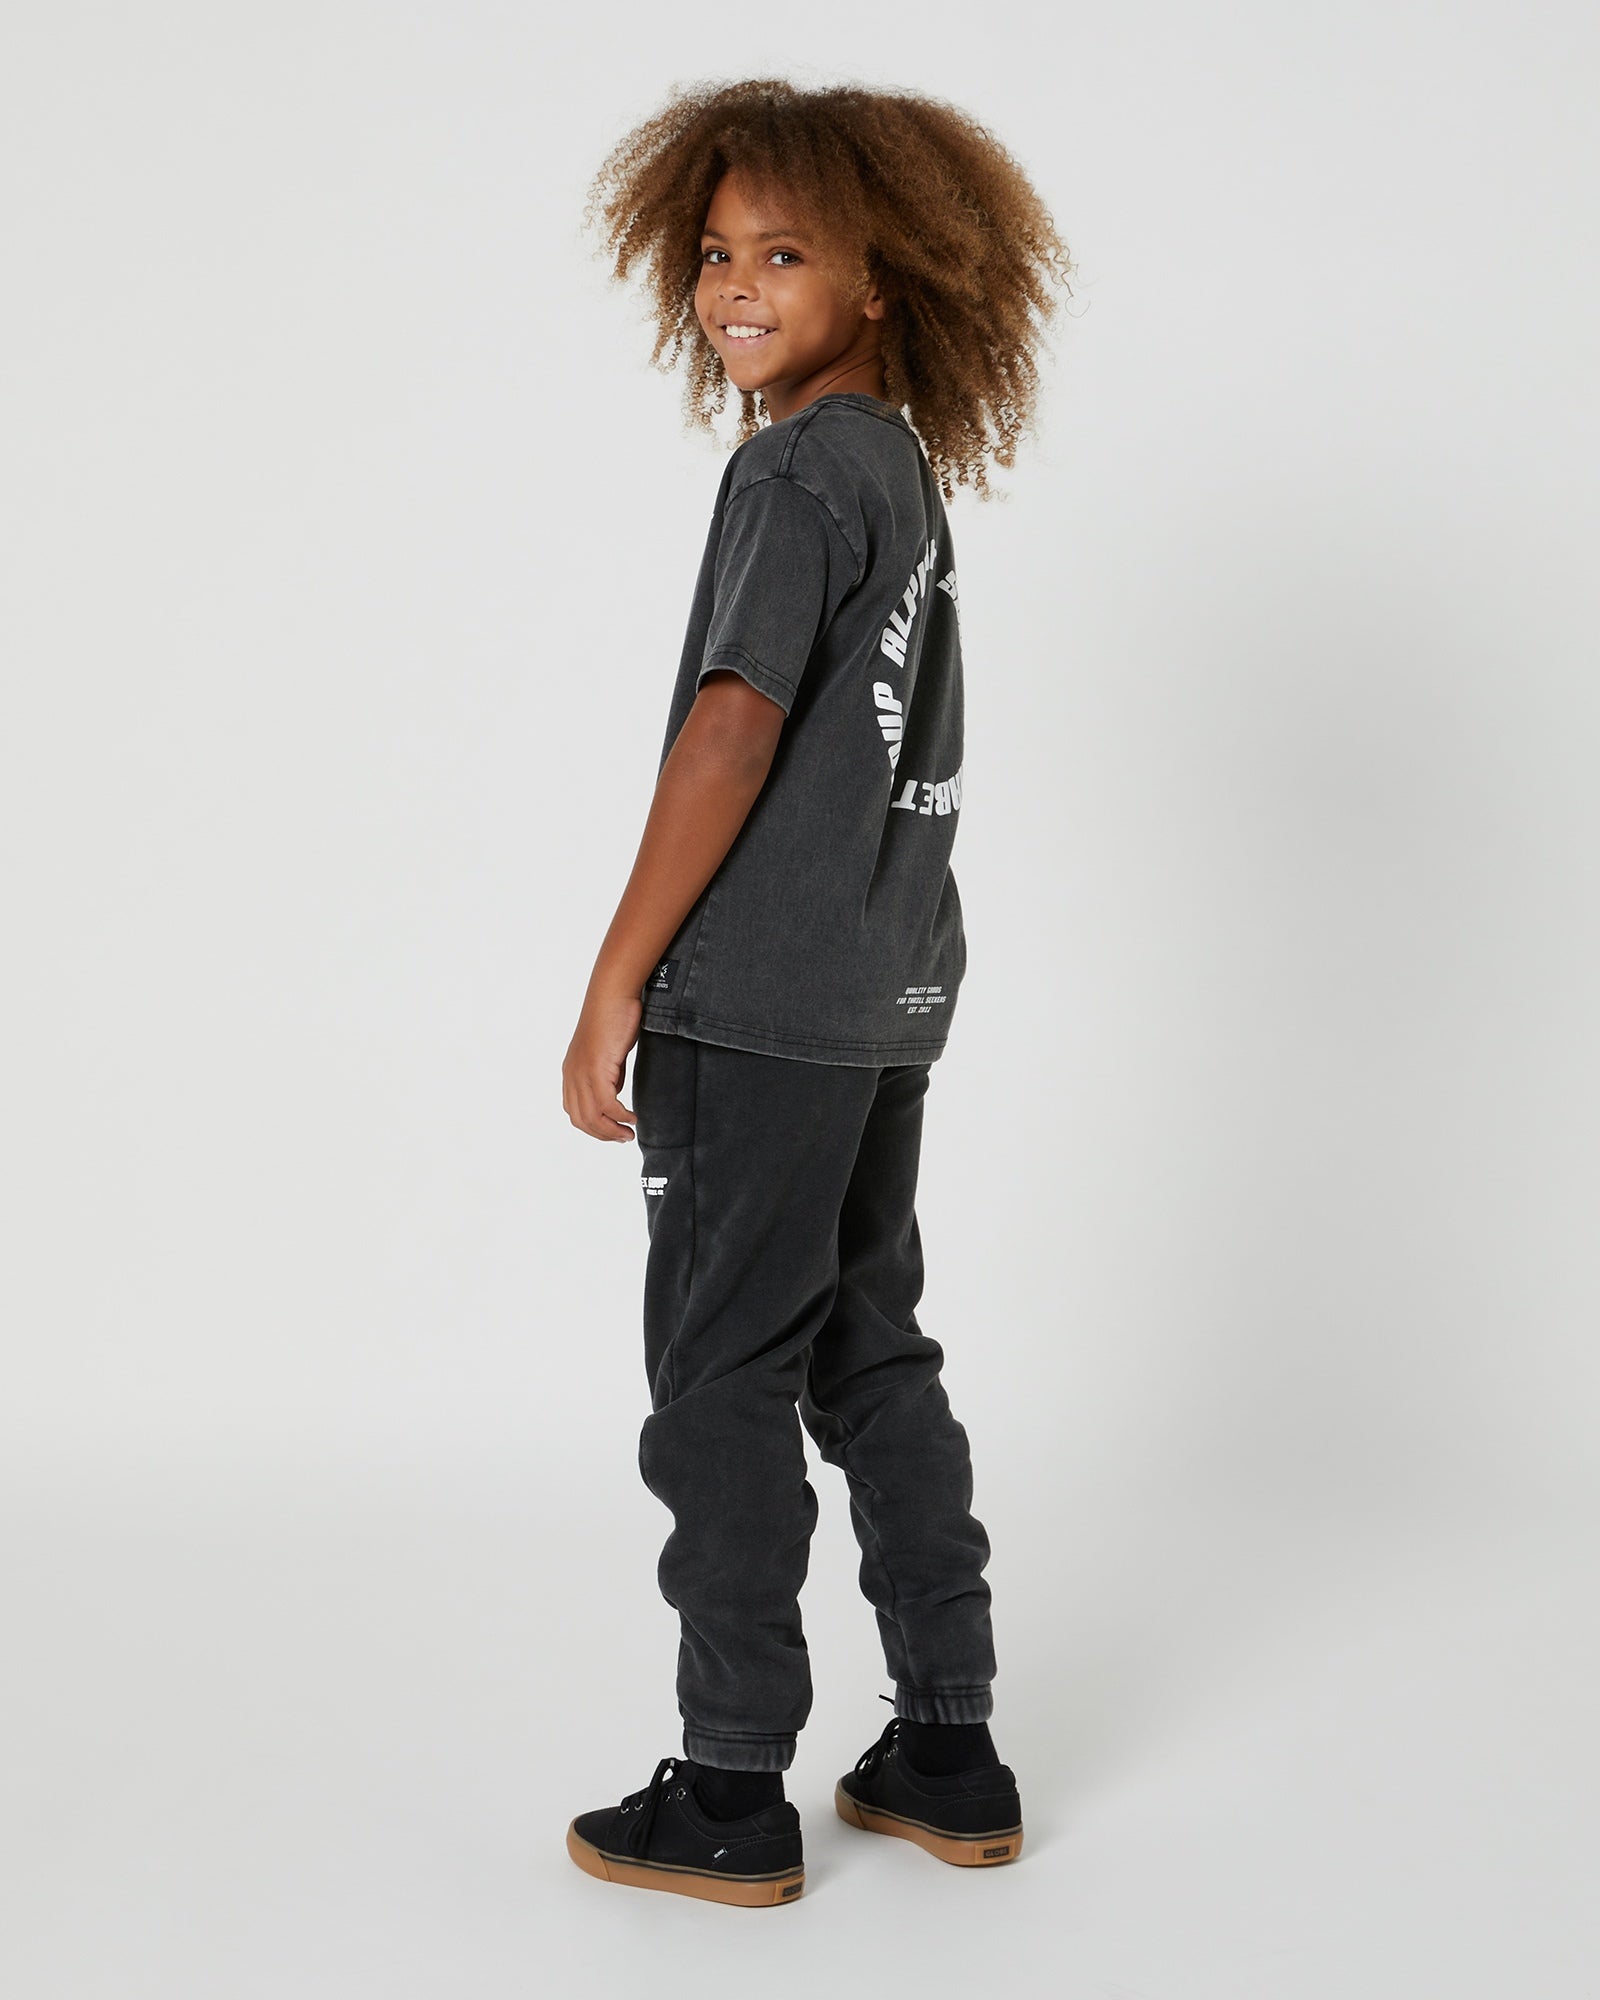 Kids San Clemente Trackpant in Steel Grey by Alphabet Soup featuring a vintage garment dye wash, heavy brushed back fleece, and puff print design on the front leg create the perfect blend of comfort and style. Elasticated waist and ribbed cuff ankles ensure an all-day fit.